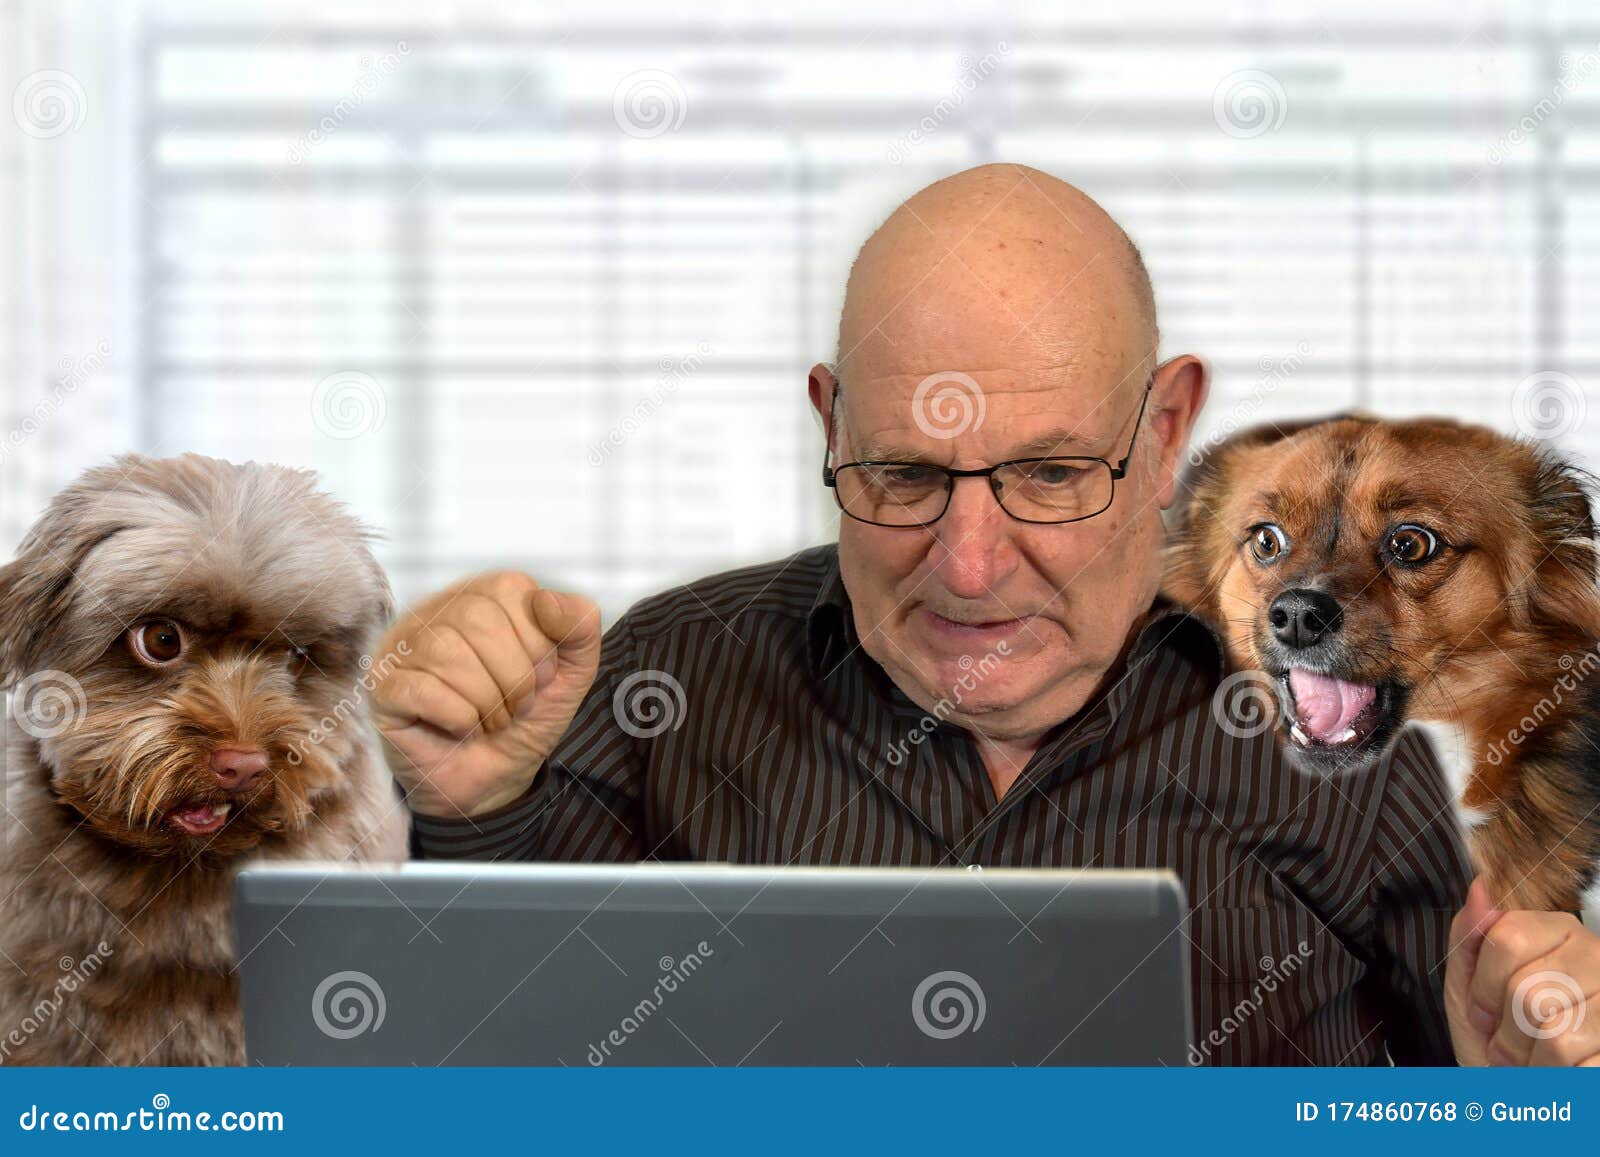 senior boss works in his office . he and his dogs look horrified at the computer screen